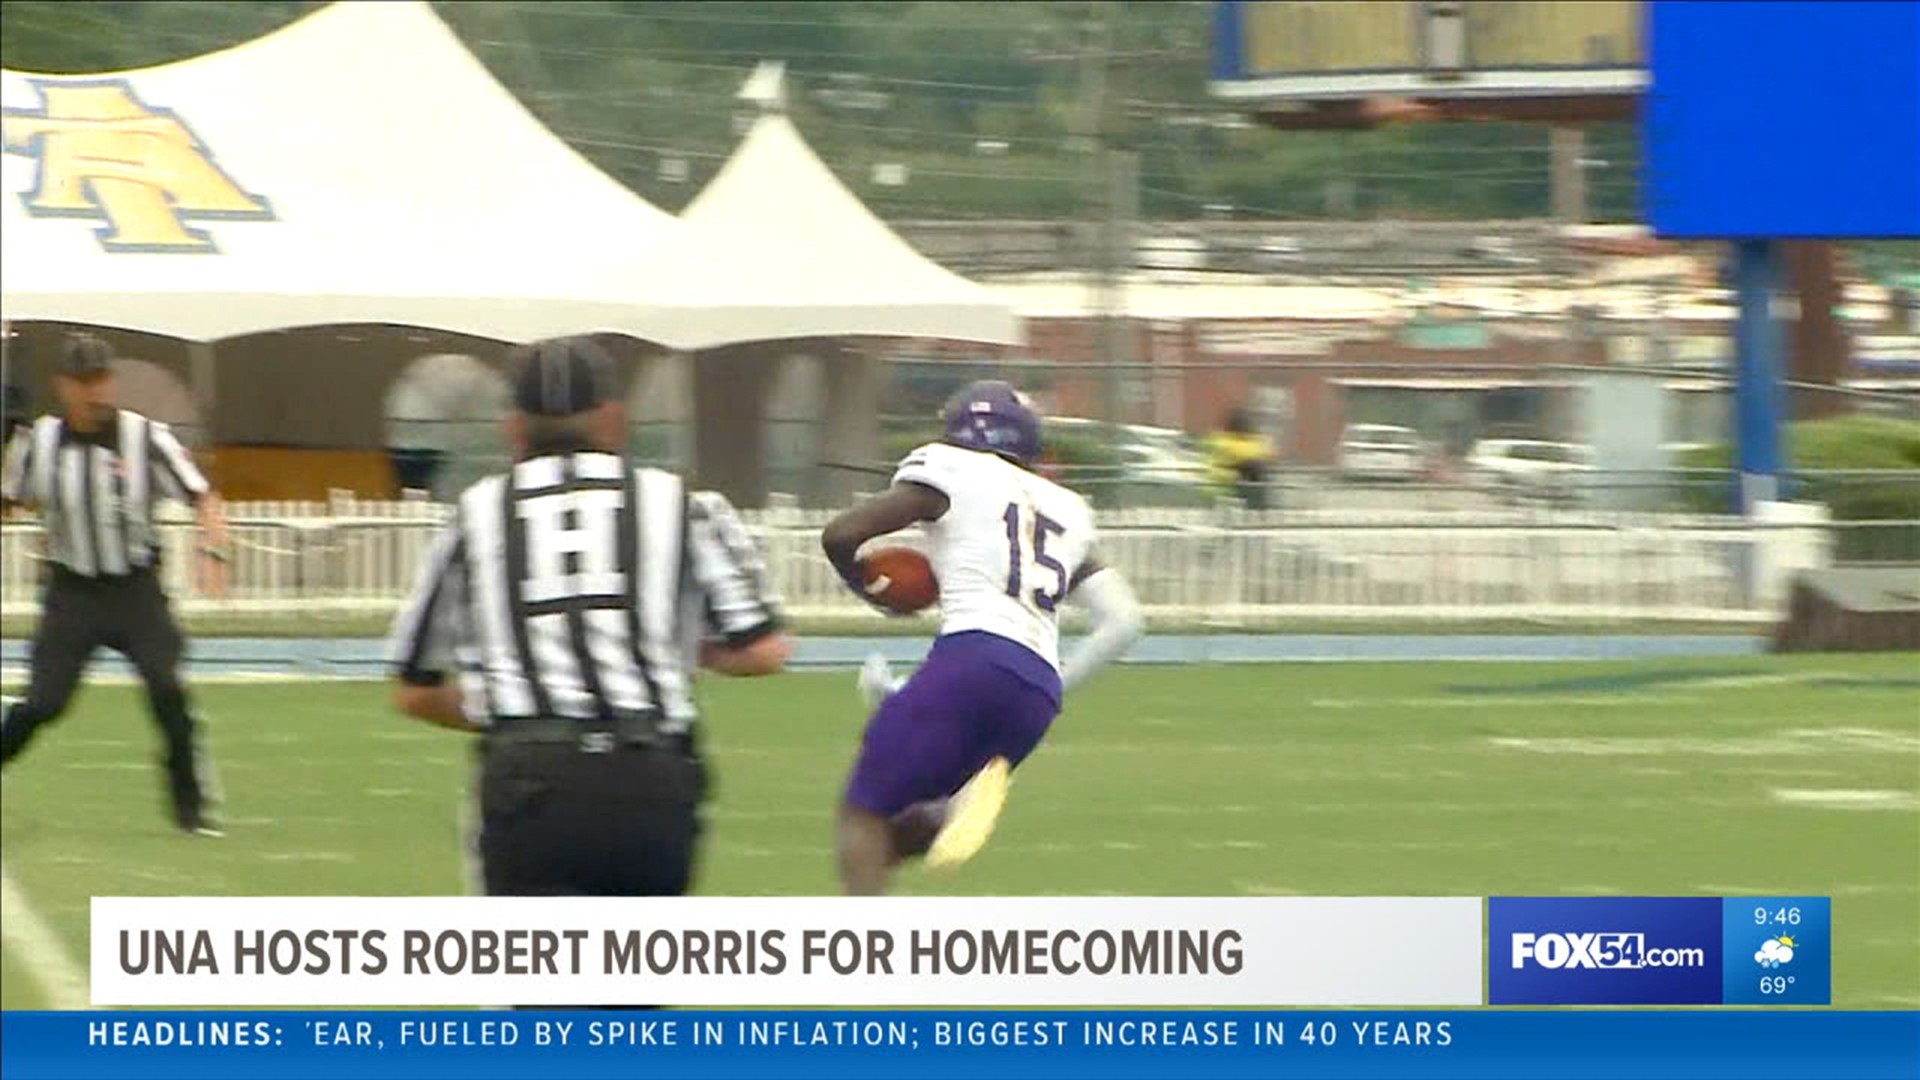 The UNA football team is hoping that tradition holds this Saturday at Braly Stadium as the Lions host Robert Morris University for Homecoming.